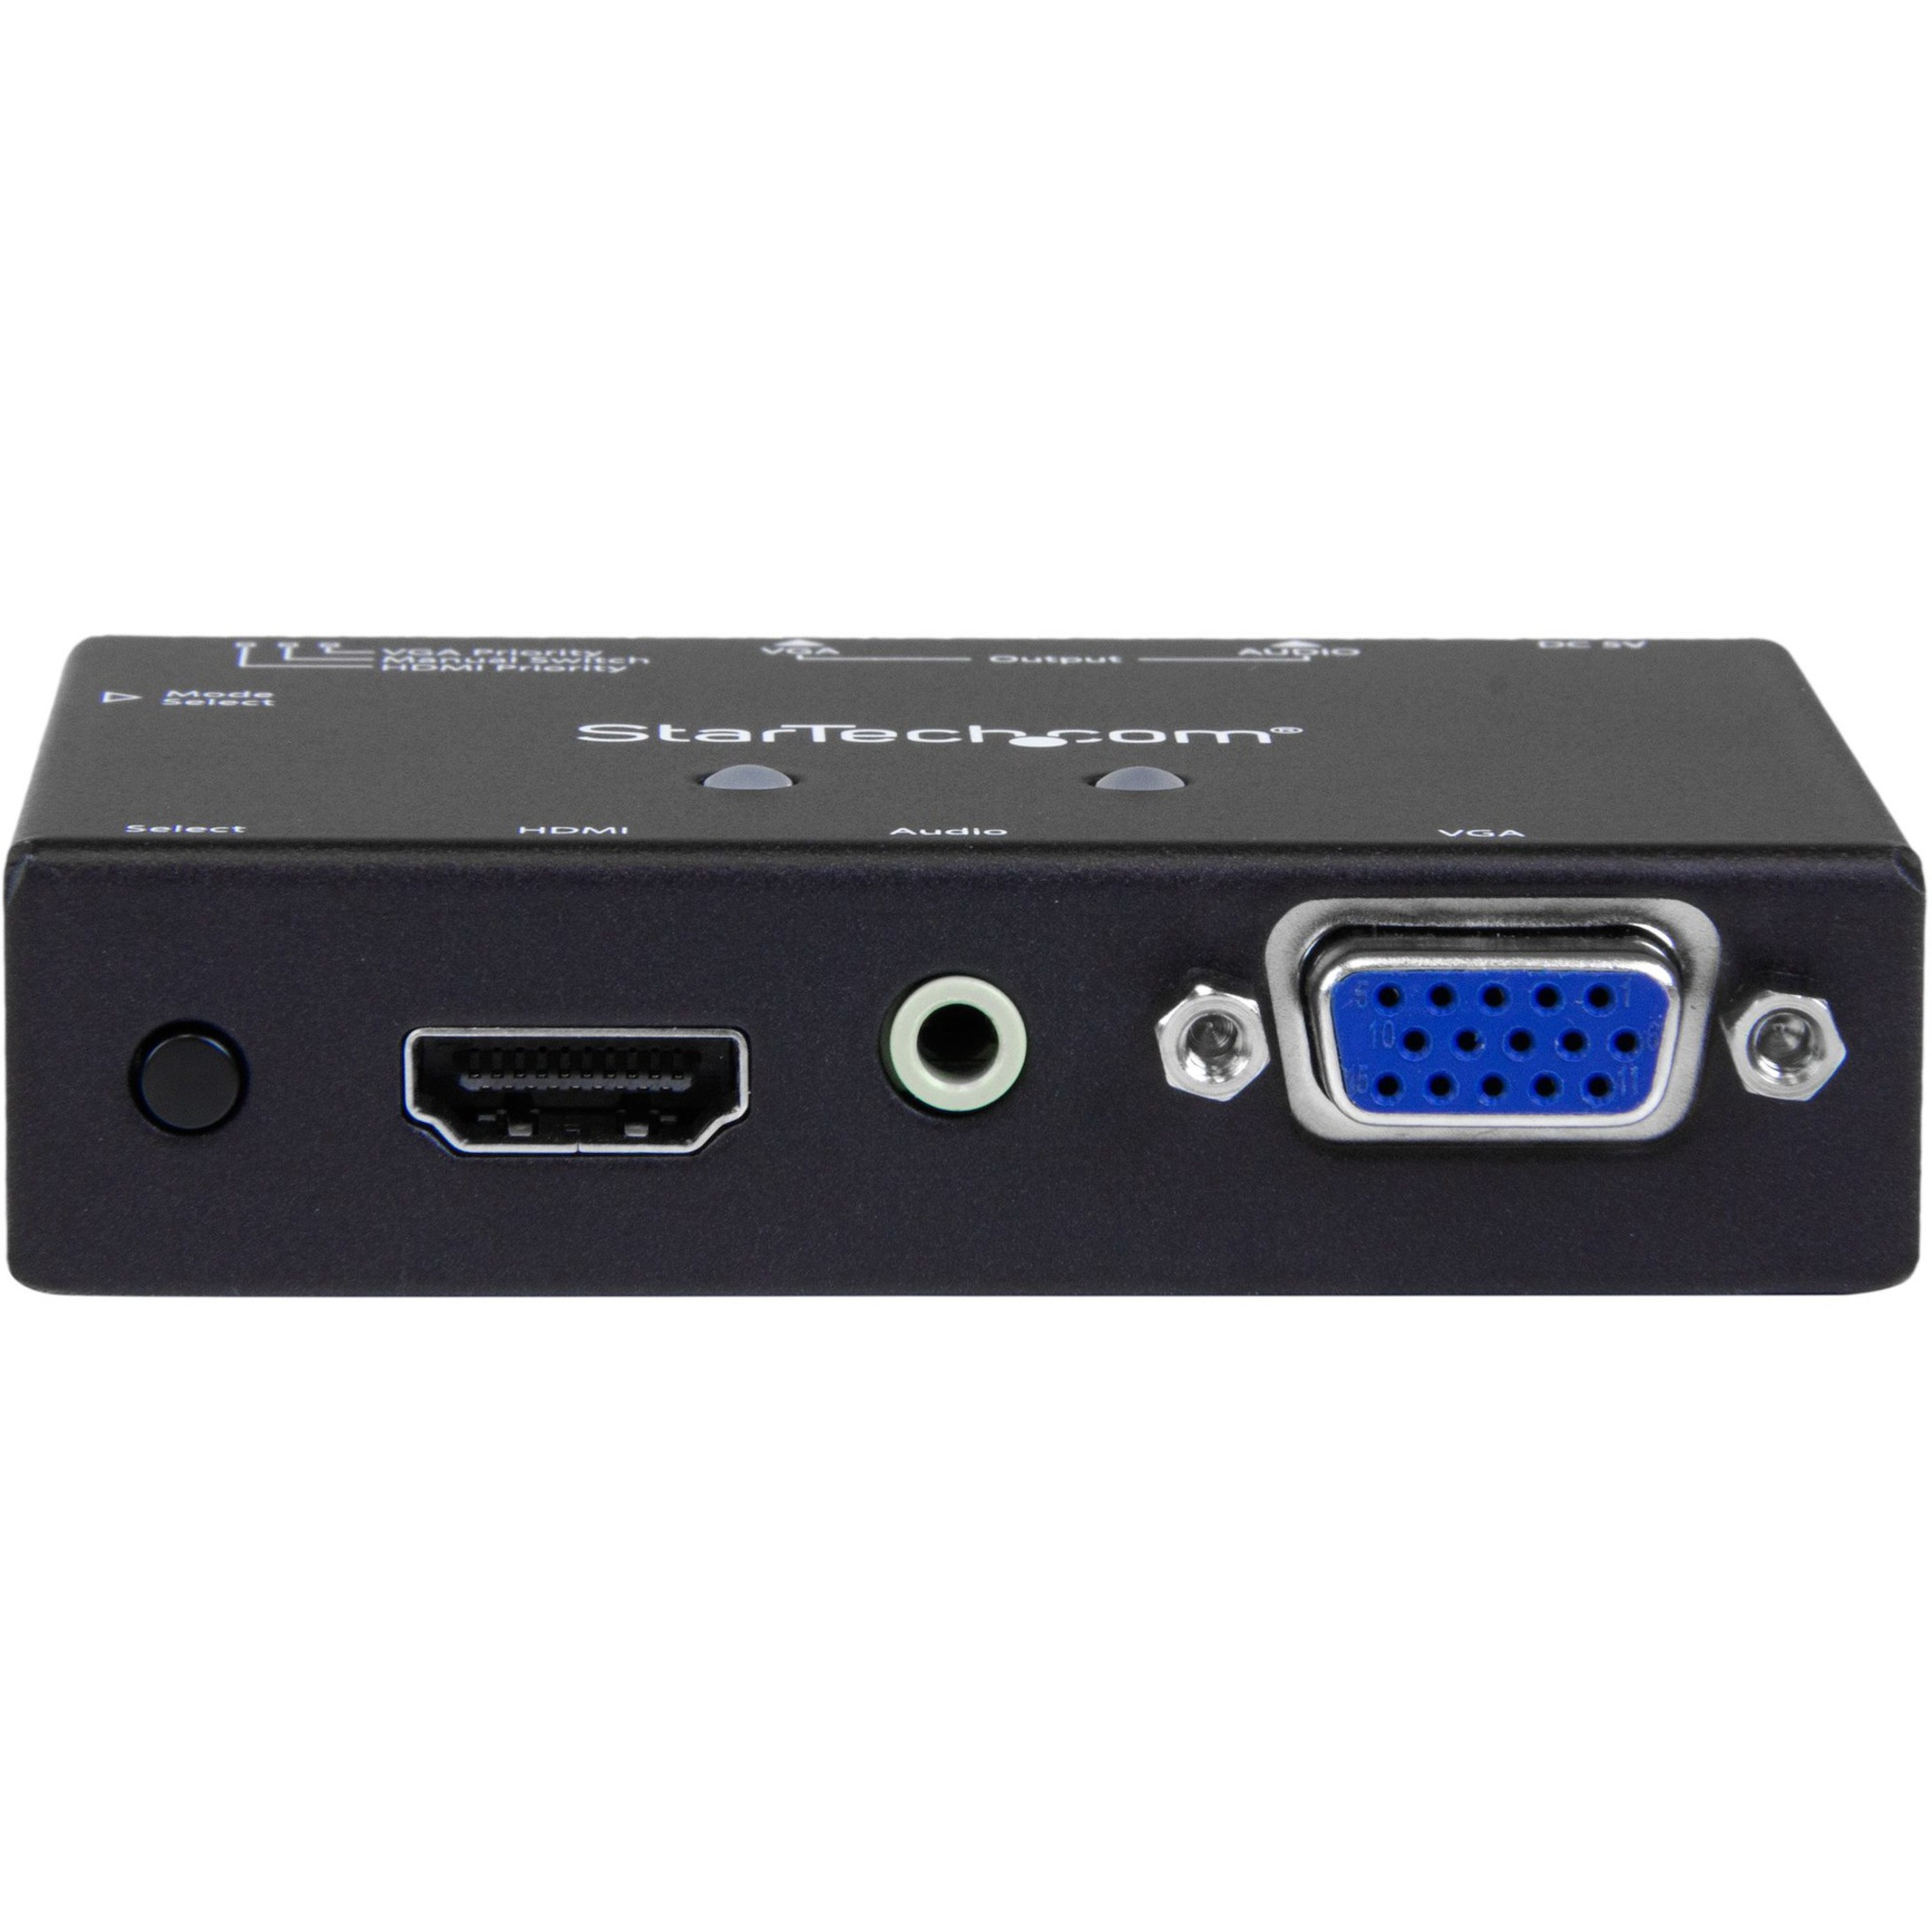 Lodge Ruin variabel Startech .com 2x1 VGA + HDMI to VGA Converter Switch w/ Priority  Switching1080pShare a VGA monitor/projector between a VGA and HDMI aud...  VS221HD2VGA - Corporate Armor